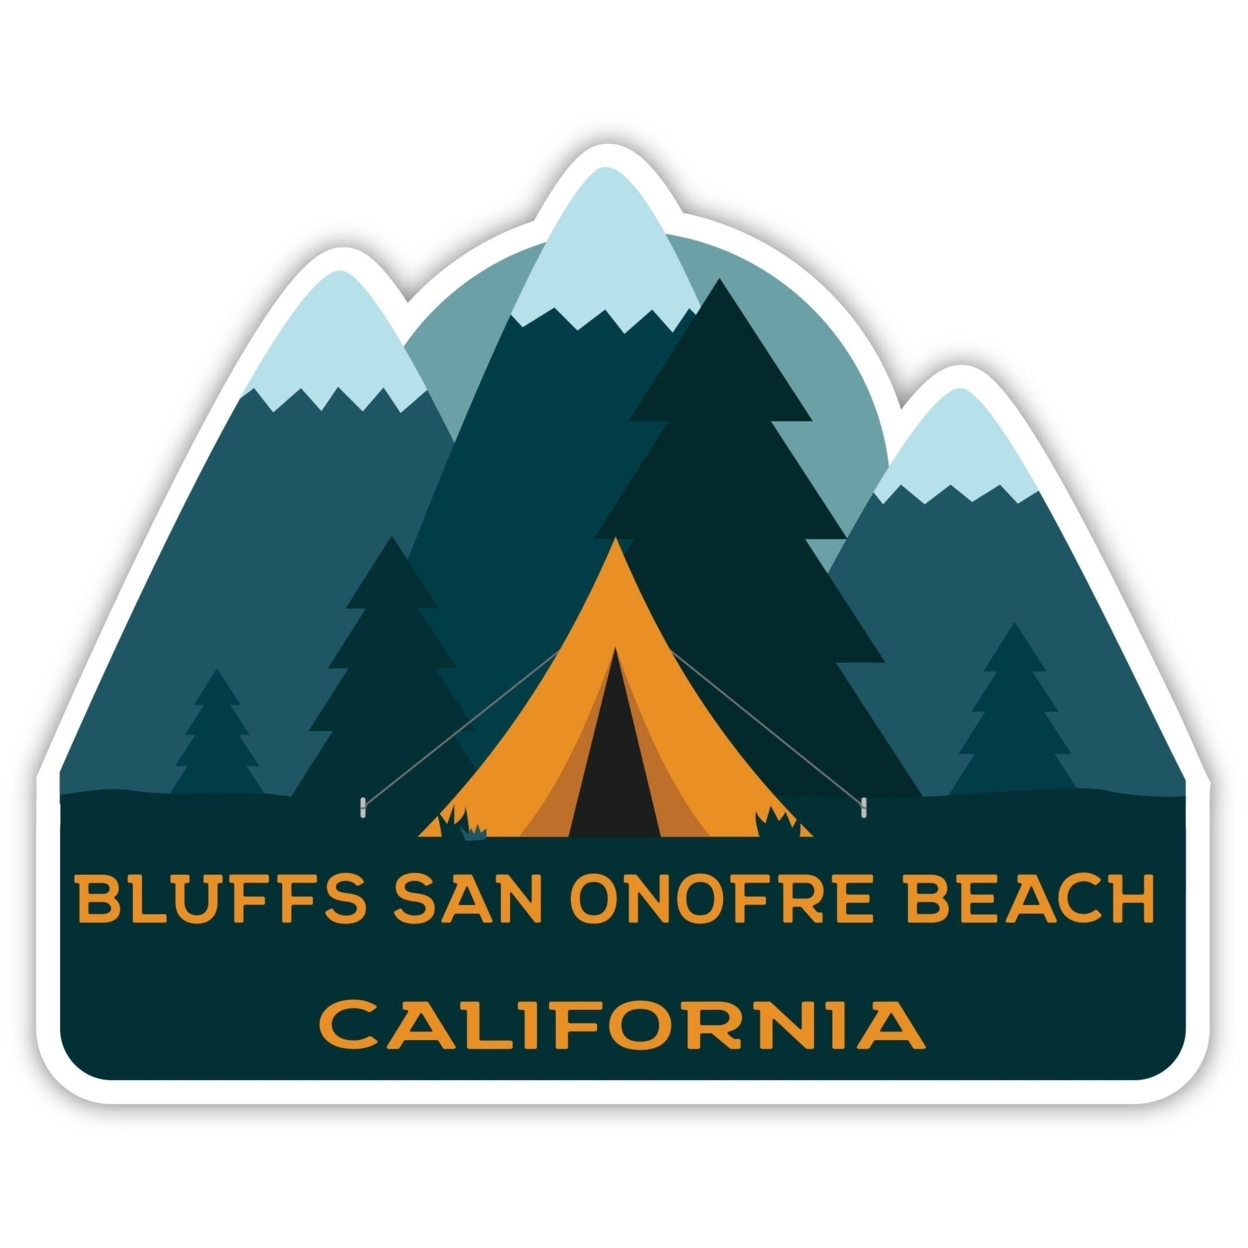 Bluffs San Onofre Beach California Souvenir Decorative Stickers (Choose Theme And Size) - 4-Pack, 12-Inch, Tent